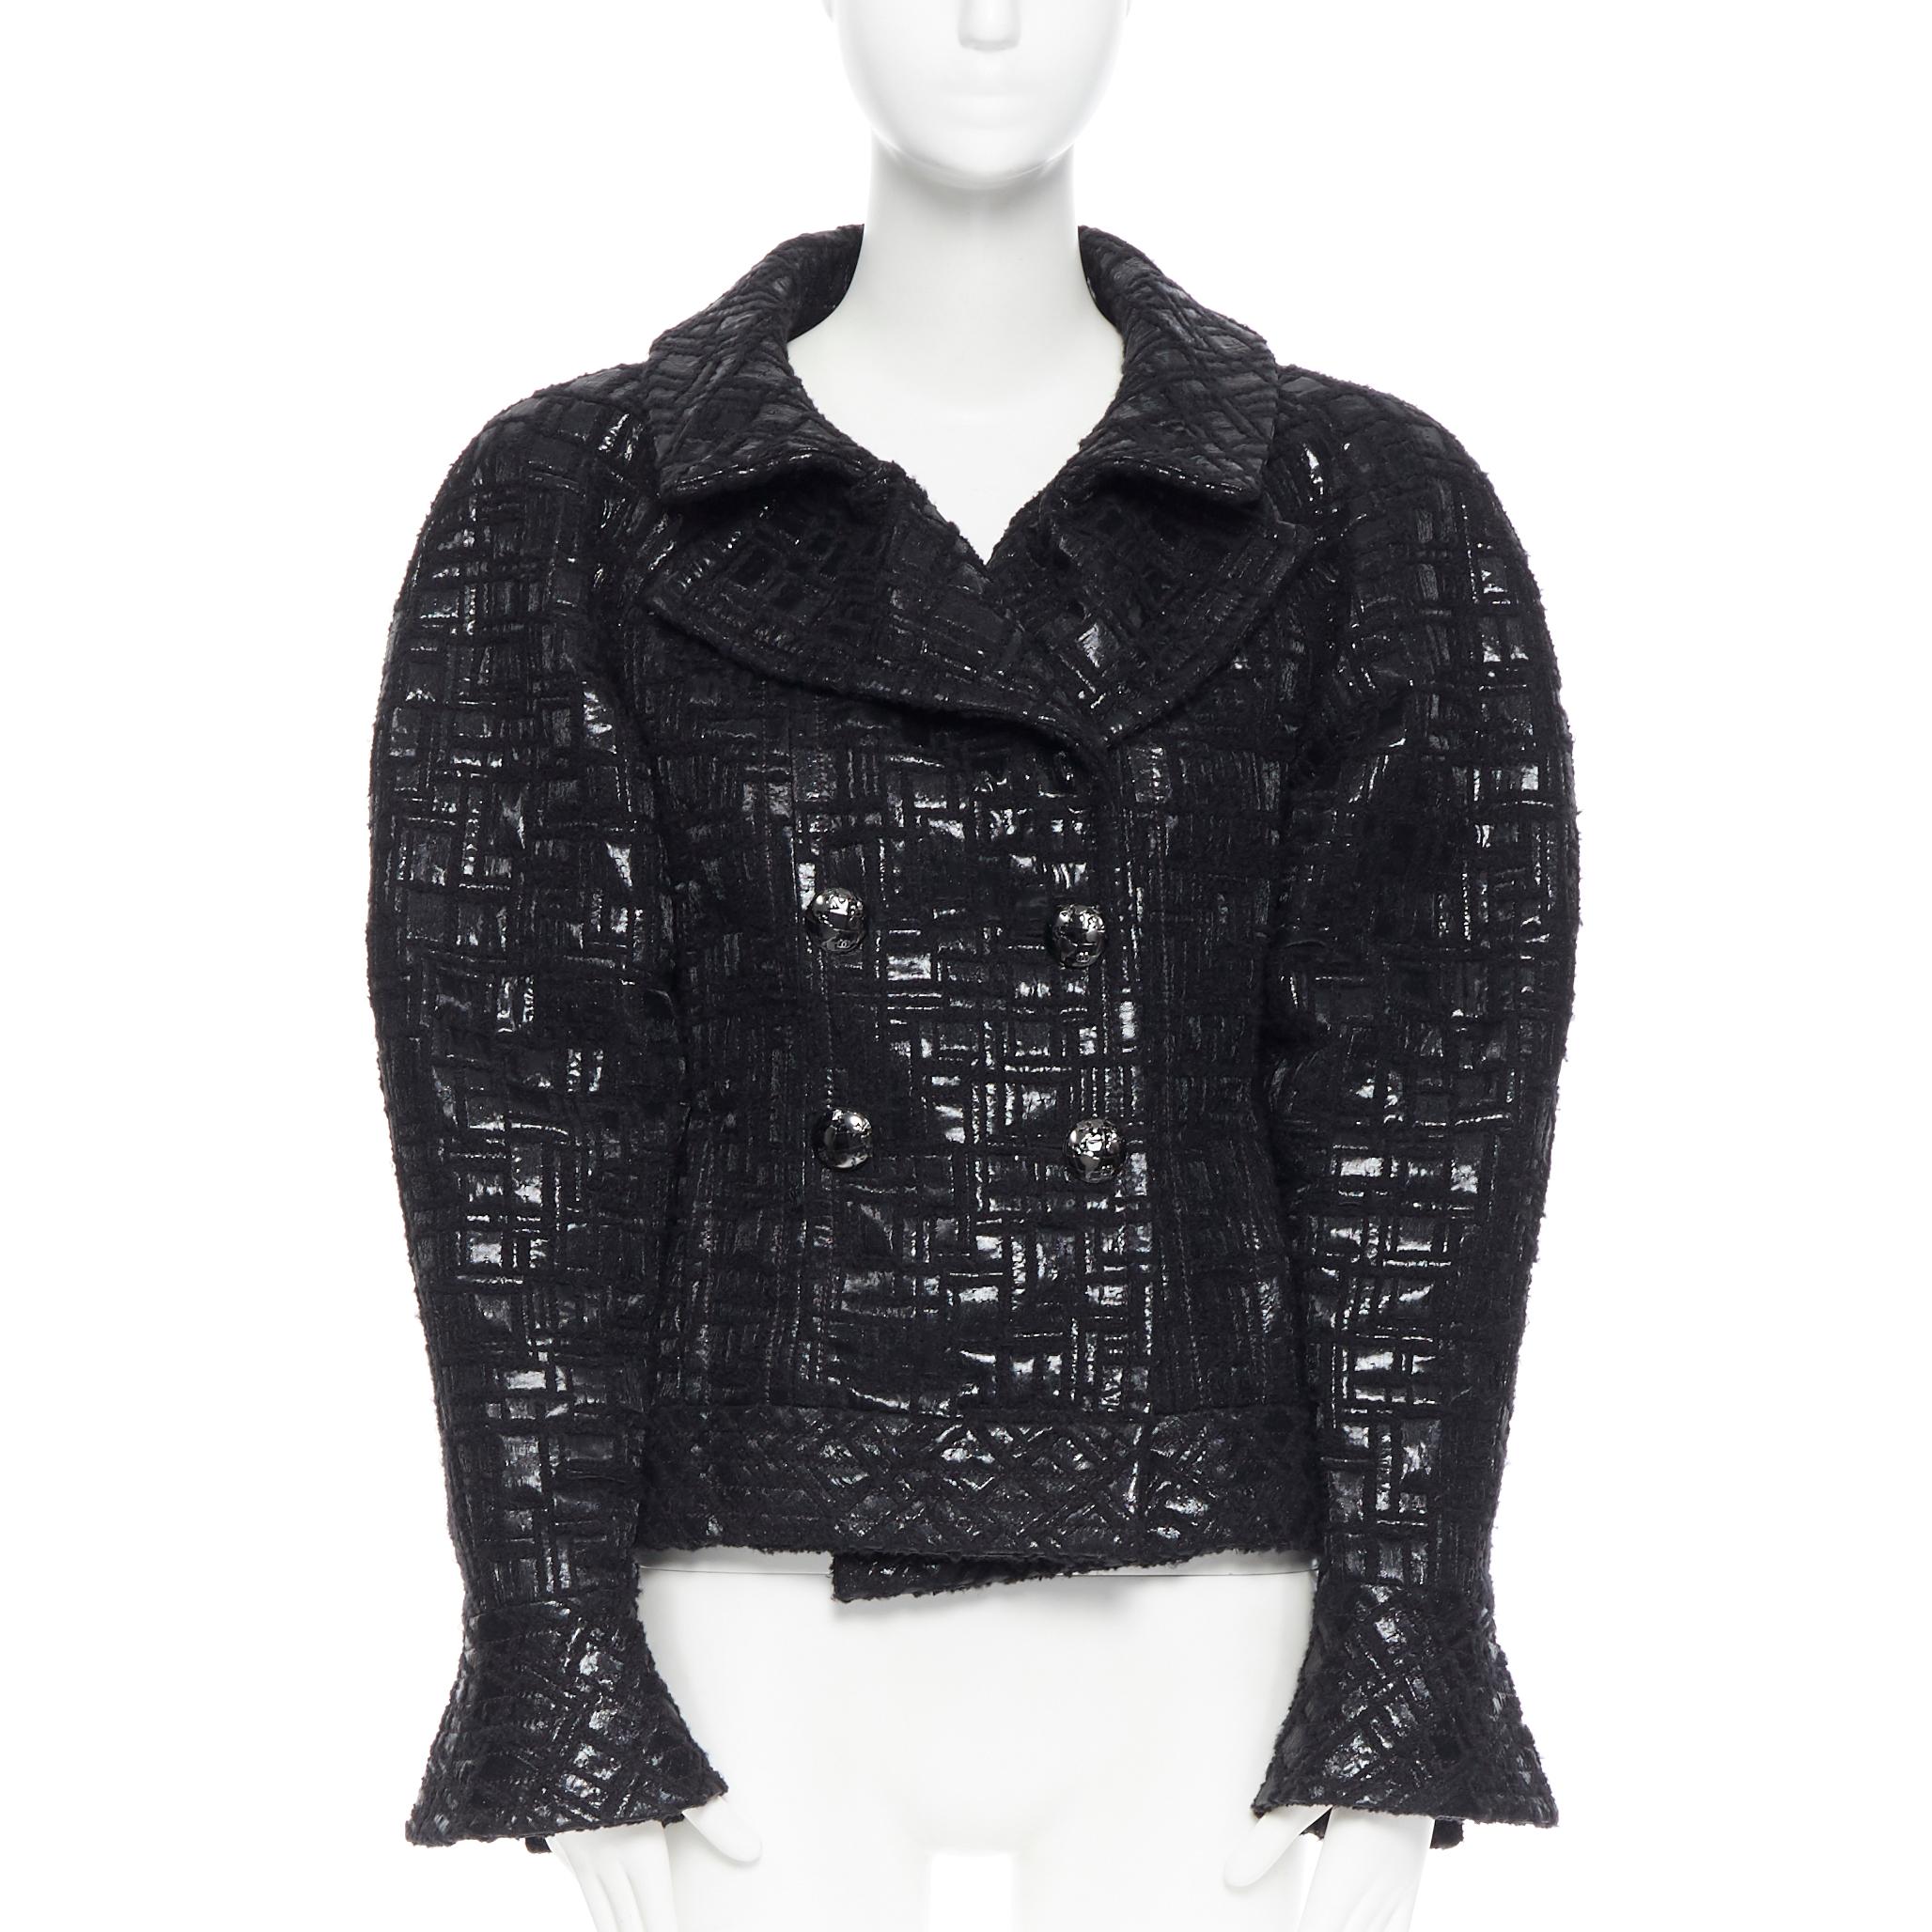 runway CHANEL 13A cyber tweed bomber sleeve double breasted black jacket FR36 Reference: ZING/A00135 
Brand: Chanel 
Designer: Karl Lagerfeld 
Collection: 13A Runway 
Material: Tweed 
Color: Black 
Pattern: Geometric 
Closure: Button 
Extra Detail: